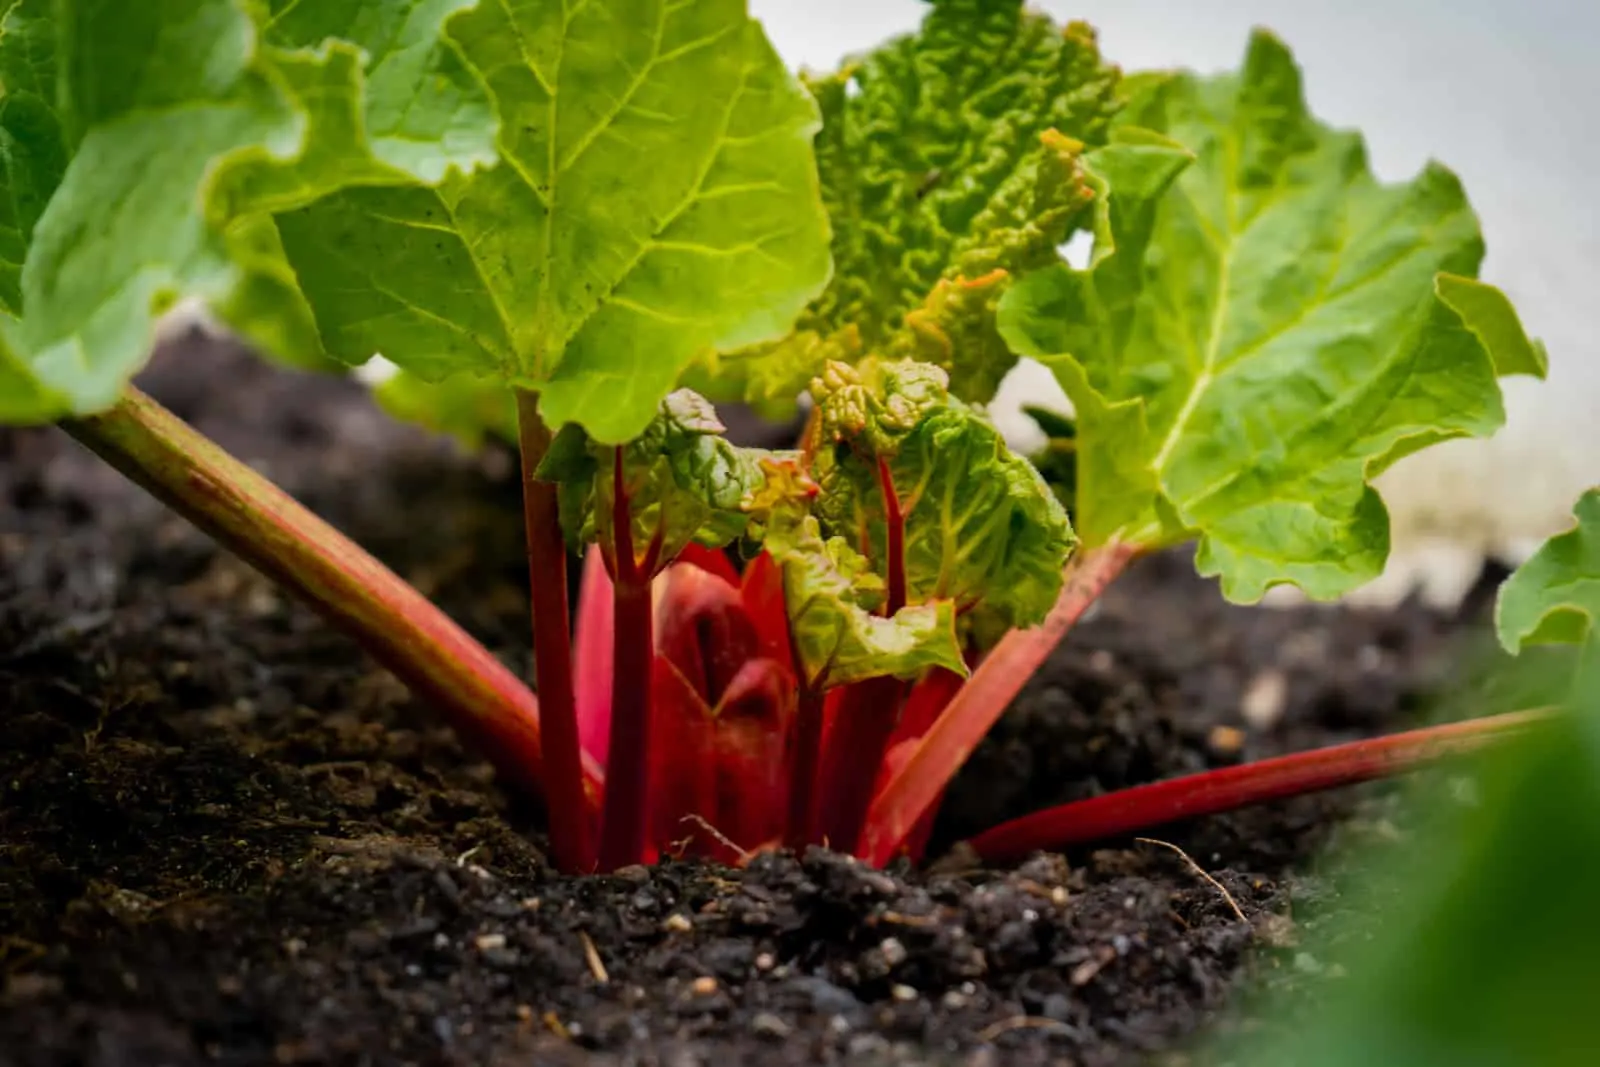 Bright red rhubarb growing in a garden